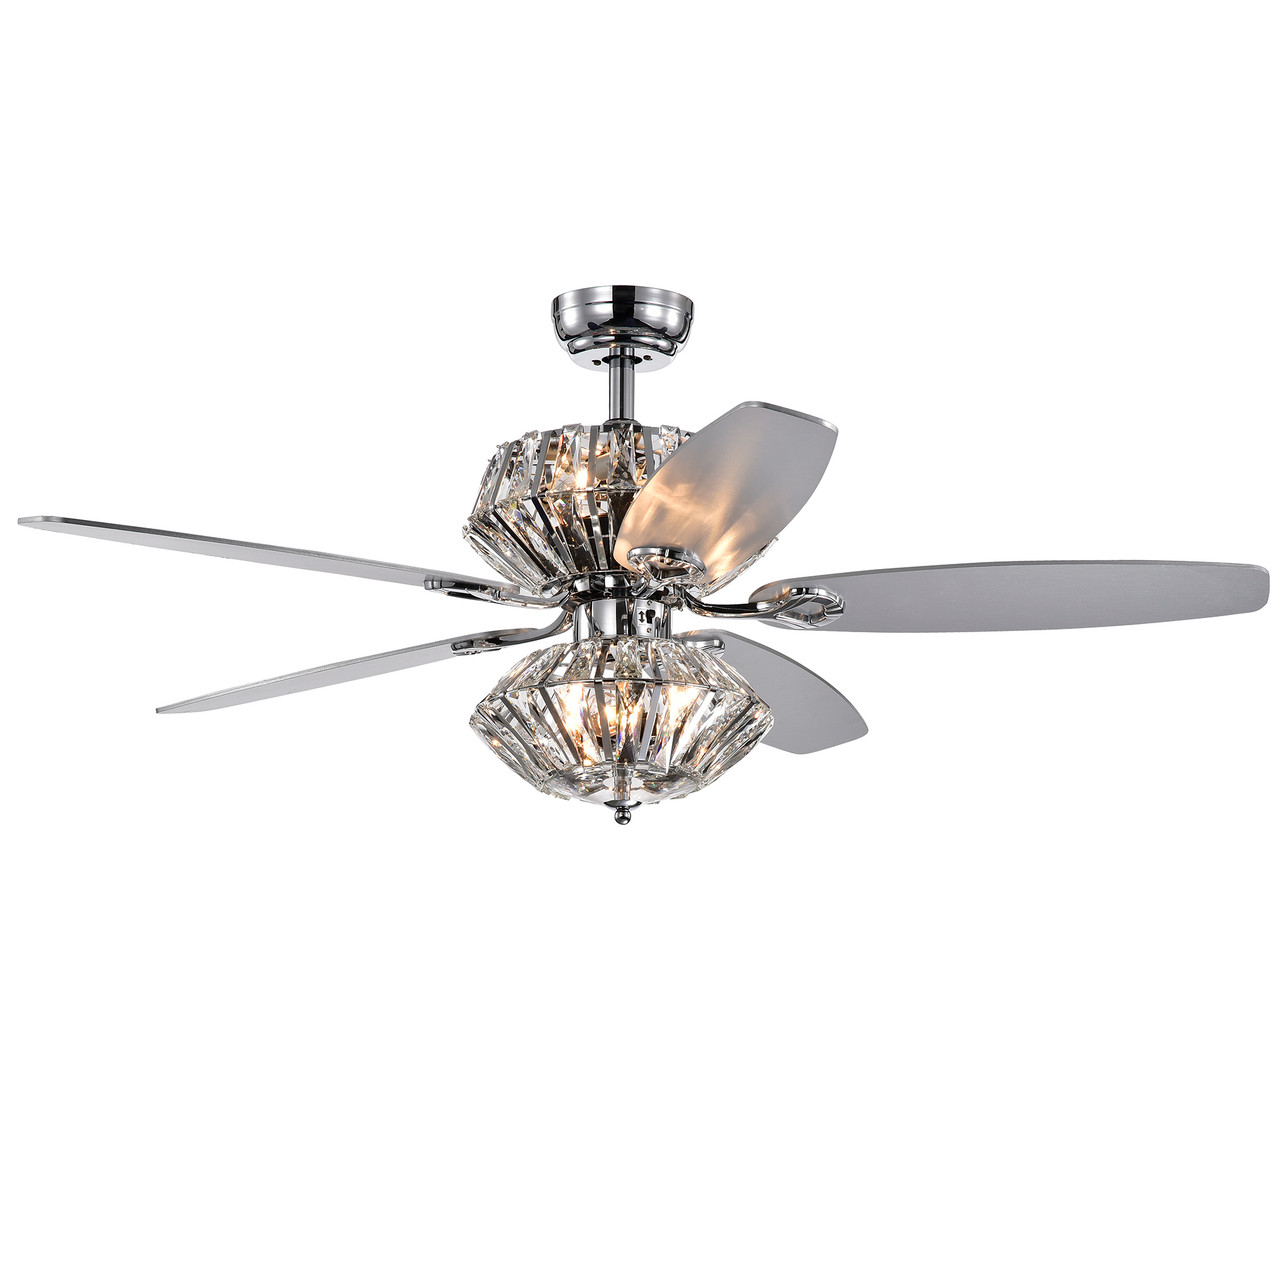 WAREHOUSE OF TIFFANY'S CFL-8366REMO/CHD Toshevo 52 in. 6-Light Indoor Chrome Finish Remote Controlled Ceiling Fan with Light Kit